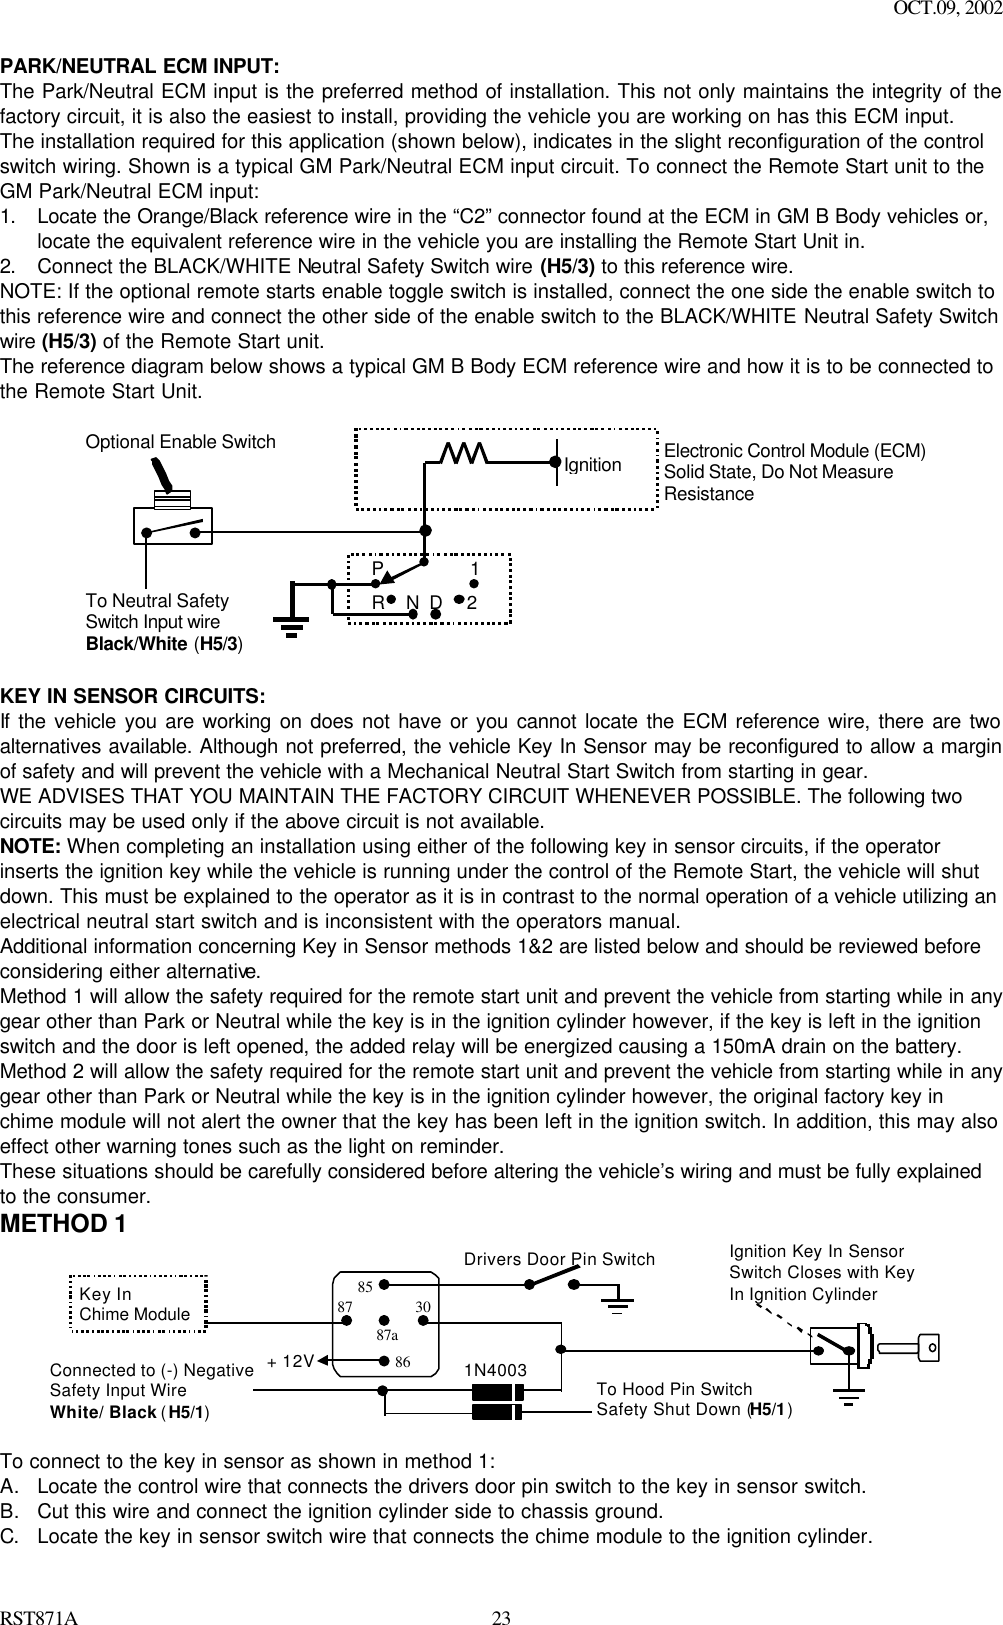 OCT.09, 2002 RST871A 23PARK/NEUTRAL ECM INPUT: The Park/Neutral ECM input is the preferred method of installation. This not only maintains the integrity of the factory circuit, it is also the easiest to install, providing the vehicle you are working on has this ECM input. The installation required for this application (shown below), indicates in the slight reconfiguration of the control switch wiring. Shown is a typical GM Park/Neutral ECM input circuit. To connect the Remote Start unit to the GM Park/Neutral ECM input: 1. Locate the Orange/Black reference wire in the “C2” connector found at the ECM in GM B Body vehicles or, locate the equivalent reference wire in the vehicle you are installing the Remote Start Unit in. 2. Connect the BLACK/WHITE Neutral Safety Switch wire (H5/3) to this reference wire. NOTE: If the optional remote starts enable toggle switch is installed, connect the one side the enable switch to this reference wire and connect the other side of the enable switch to the BLACK/WHITE Neutral Safety Switch wire (H5/3) of the Remote Start unit. The reference diagram below shows a typical GM B Body ECM reference wire and how it is to be connected to the Remote Start Unit.            IgnitionP12DNRElectronic Control Module (ECM)Solid State, Do Not MeasureResistanceTo Neutral SafetySwitch Input wireBlack/White (H5/3)Optional Enable Switch  KEY IN SENSOR CIRCUITS: If the vehicle you are working on does not have or you cannot locate the ECM reference wire, there are two alternatives available. Although not preferred, the vehicle Key In Sensor may be reconfigured to allow a margin of safety and will prevent the vehicle with a Mechanical Neutral Start Switch from starting in gear. WE ADVISES THAT YOU MAINTAIN THE FACTORY CIRCUIT WHENEVER POSSIBLE. The following two circuits may be used only if the above circuit is not available. NOTE: When completing an installation using either of the following key in sensor circuits, if the operator inserts the ignition key while the vehicle is running under the control of the Remote Start, the vehicle will shut down. This must be explained to the operator as it is in contrast to the normal operation of a vehicle utilizing an electrical neutral start switch and is inconsistent with the operators manual. Additional information concerning Key in Sensor methods 1&amp;2 are listed below and should be reviewed before considering either alternative. Method 1 will allow the safety required for the remote start unit and prevent the vehicle from starting while in any gear other than Park or Neutral while the key is in the ignition cylinder however, if the key is left in the ignition switch and the door is left opened, the added relay will be energized causing a 150mA drain on the battery. Method 2 will allow the safety required for the remote start unit and prevent the vehicle from starting while in any gear other than Park or Neutral while the key is in the ignition cylinder however, the original factory key in chime module will not alert the owner that the key has been left in the ignition switch. In addition, this may also effect other warning tones such as the light on reminder. These situations should be carefully considered before altering the vehicle’s wiring and must be fully explained to the consumer. METHOD 1 + 12 VIgnition Key In SensorSwitch Closes with KeyIn Ignition CylinderSwitchDrivers Door Pin Switch87a86308785Key InChime ModuleConnected to (-) NegativeSafety Input WireWhite/ Black (H5/1)To Hood Pin SwitchSafety Shut Down (H5/1)1N4003+ 12V  To connect to the key in sensor as shown in method 1: A. Locate the control wire that connects the drivers door pin switch to the key in sensor switch. B. Cut this wire and connect the ignition cylinder side to chassis ground. C. Locate the key in sensor switch wire that connects the chime module to the ignition cylinder. 